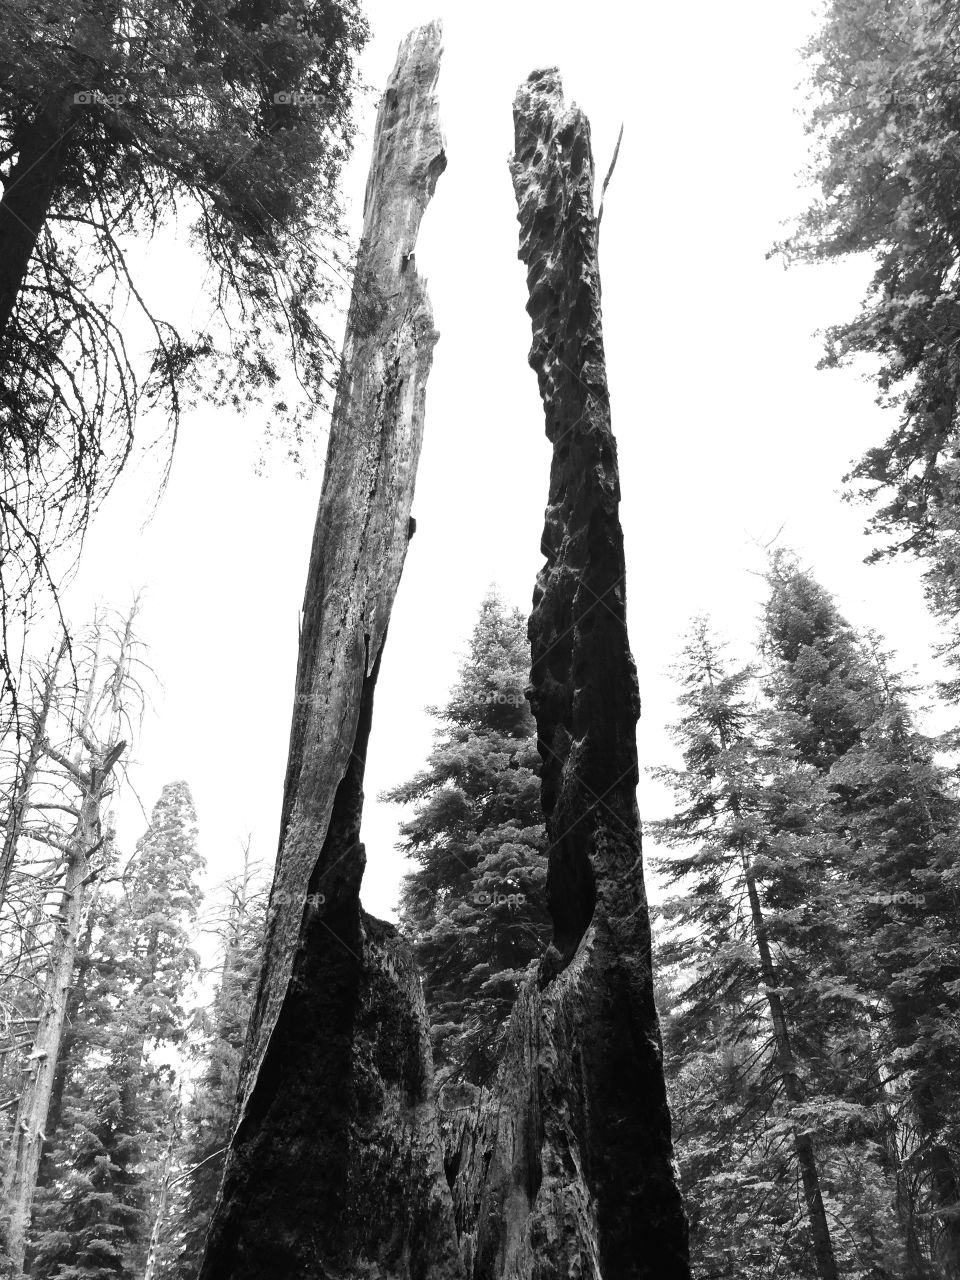 The beauty of sequoia trees in Yosemite National Park